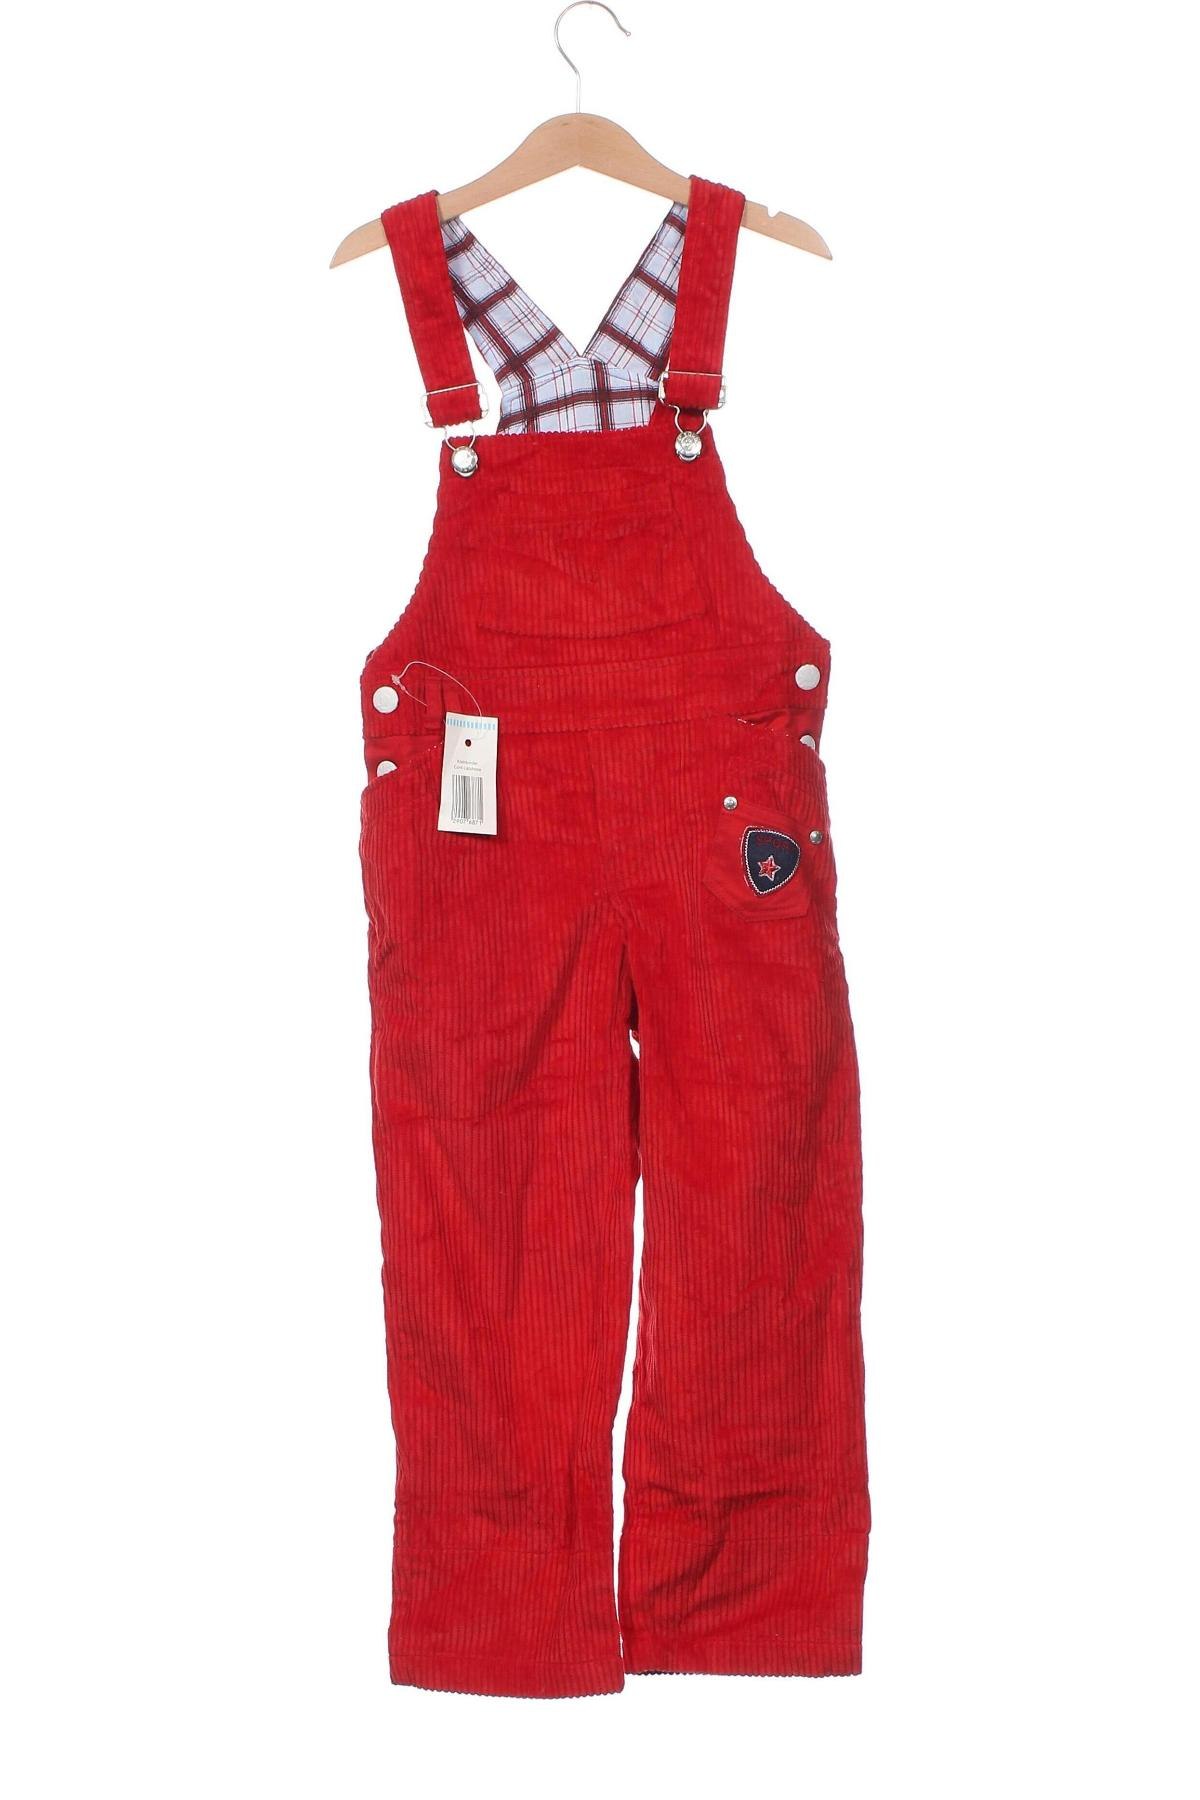 Kinder Overall Papagino, Größe 3-4y/ 104-110 cm, Farbe Rot, Preis 12,25 €